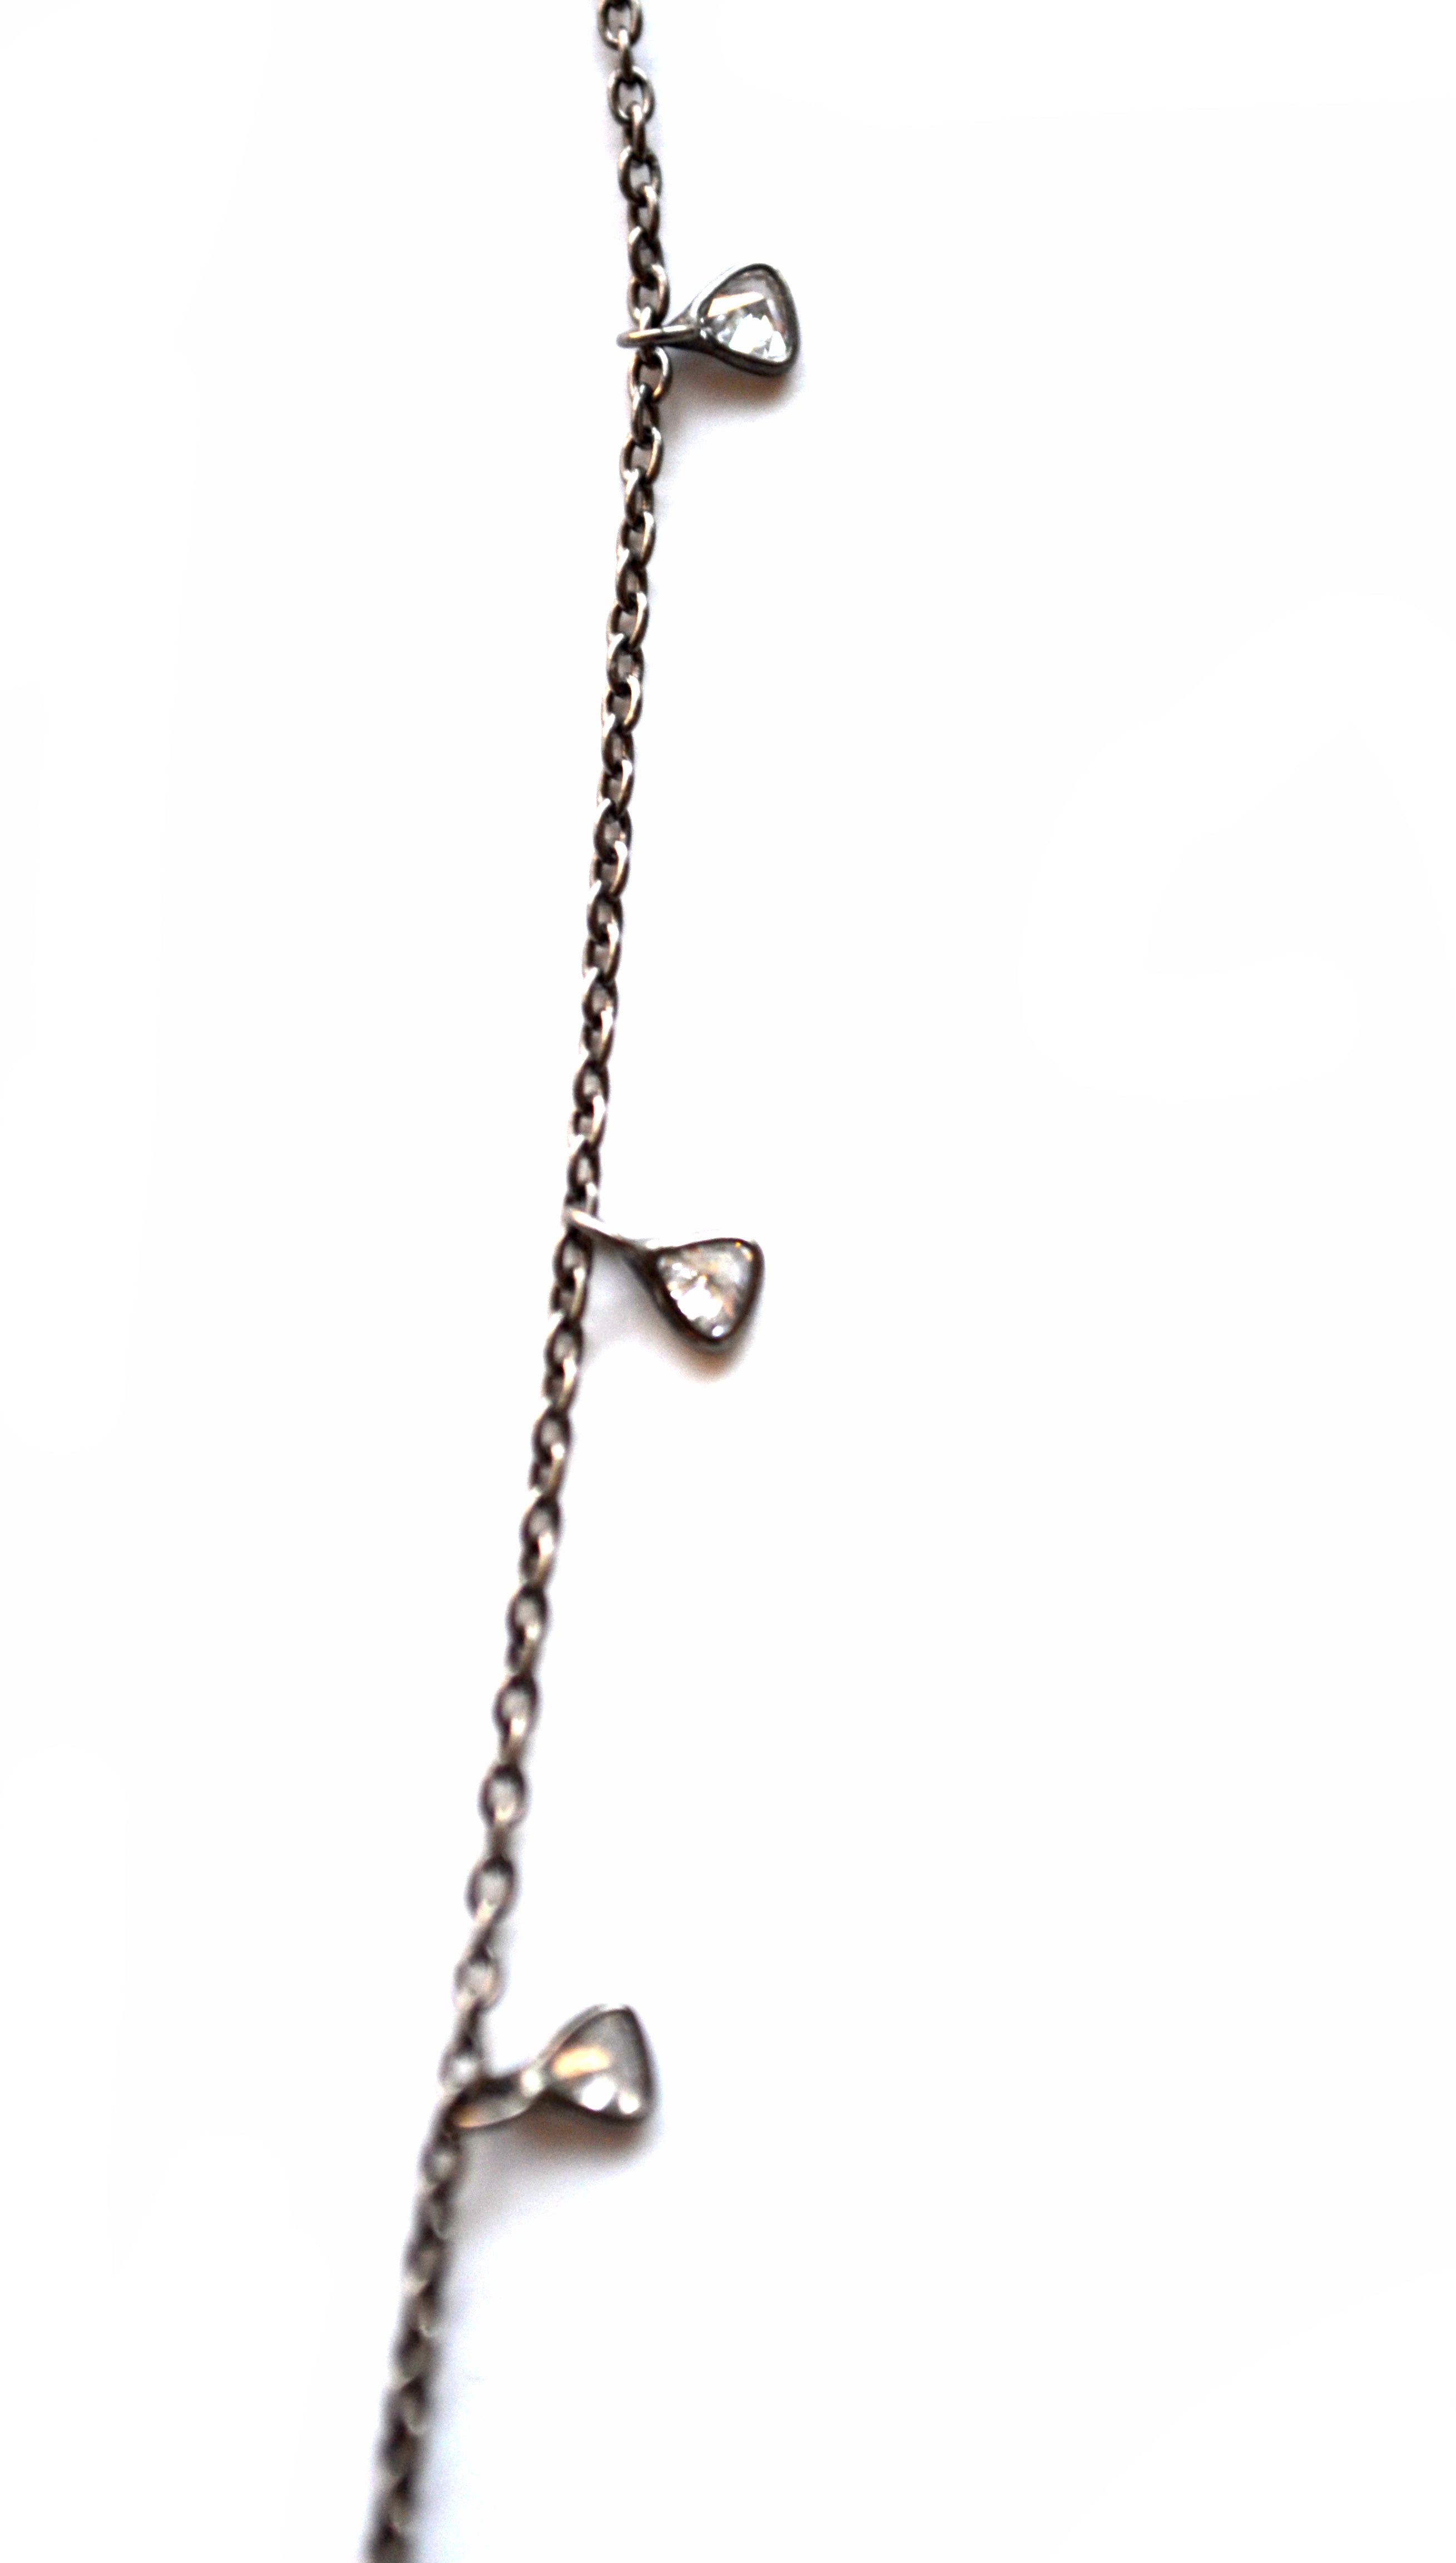 Oxidized Sterling Silver Celestial Diamond Necklace with an Eye Charm